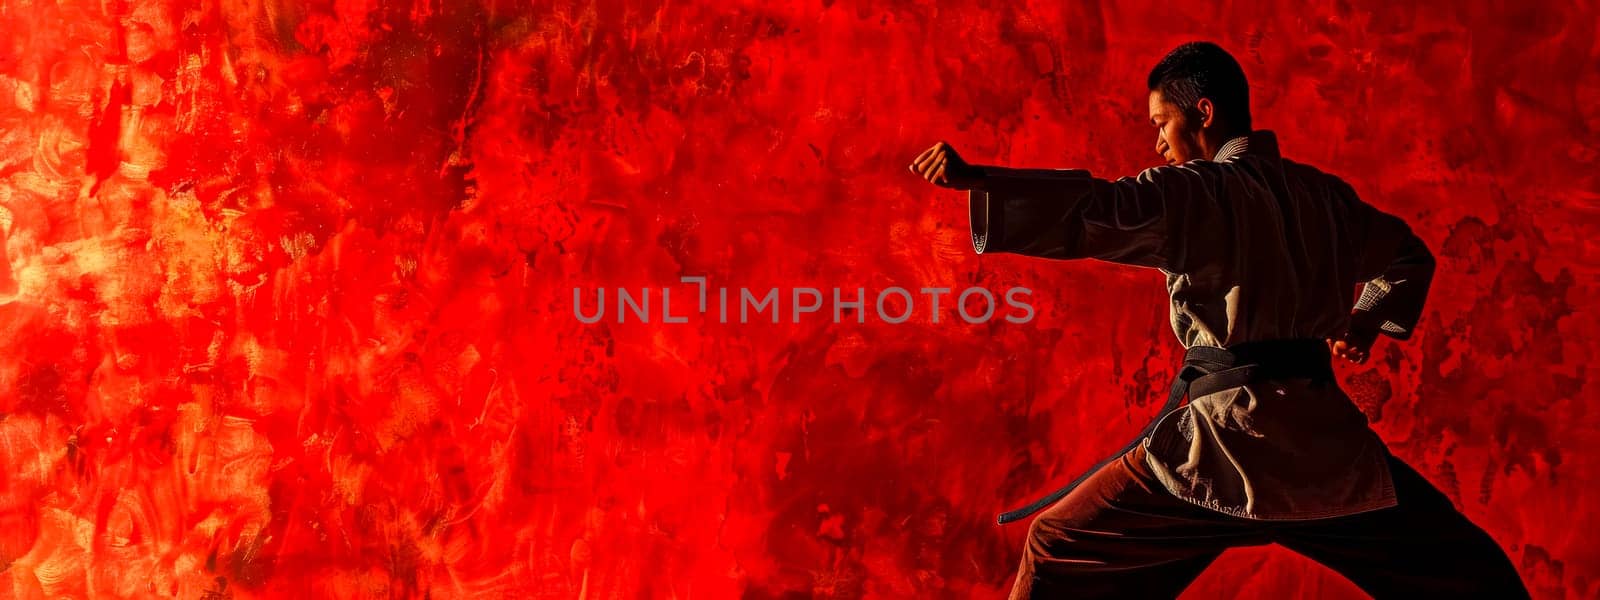 Silhouette of a martial artist performing a strike in front of a vivid red backdrop